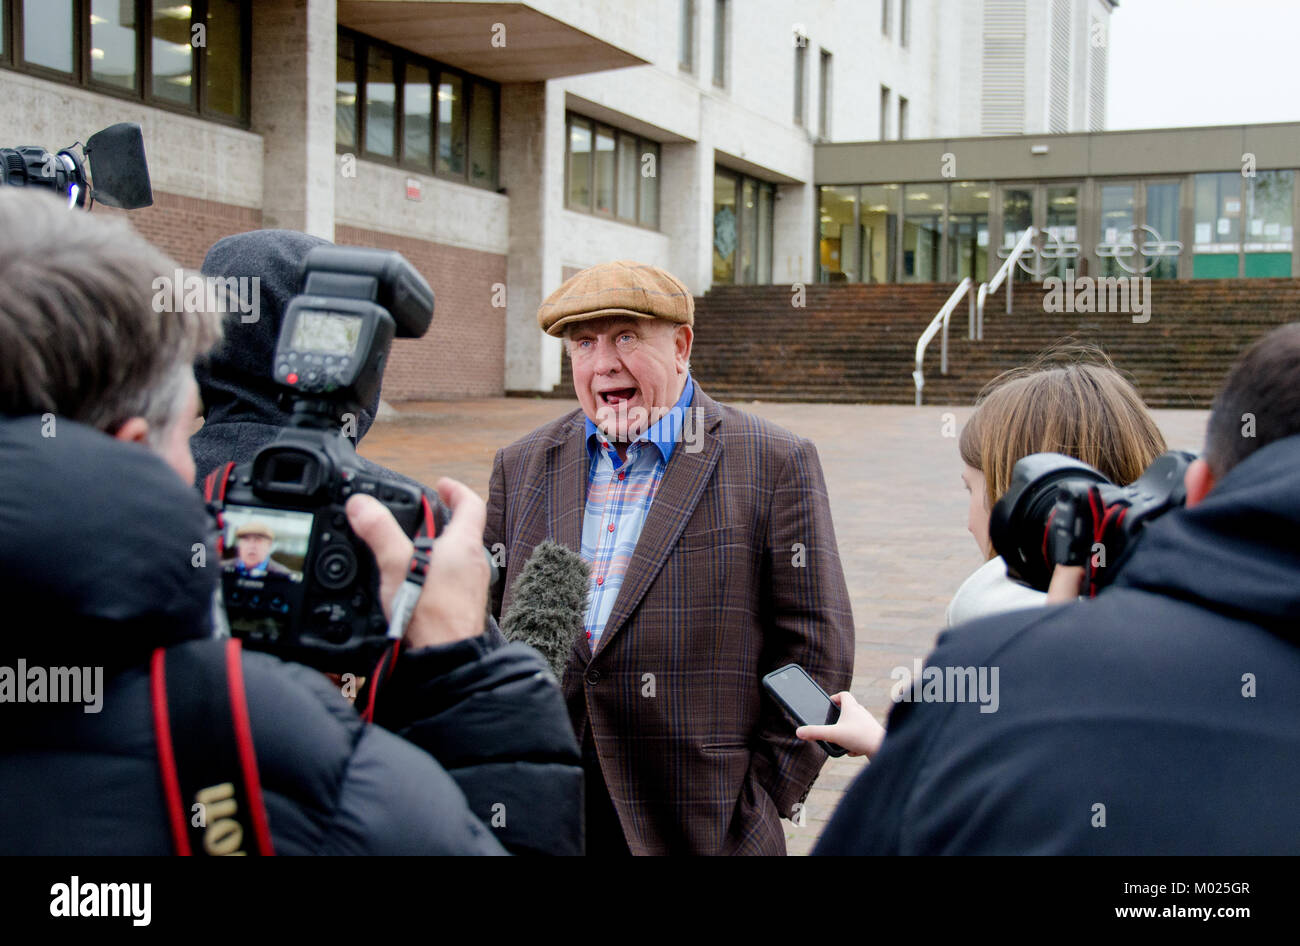 Fergus Wilson, landlord in Kent, England, at Maidstone Crown Court (2017) after being found in contravention of section 13 of the Equality Act 2010. Stock Photo